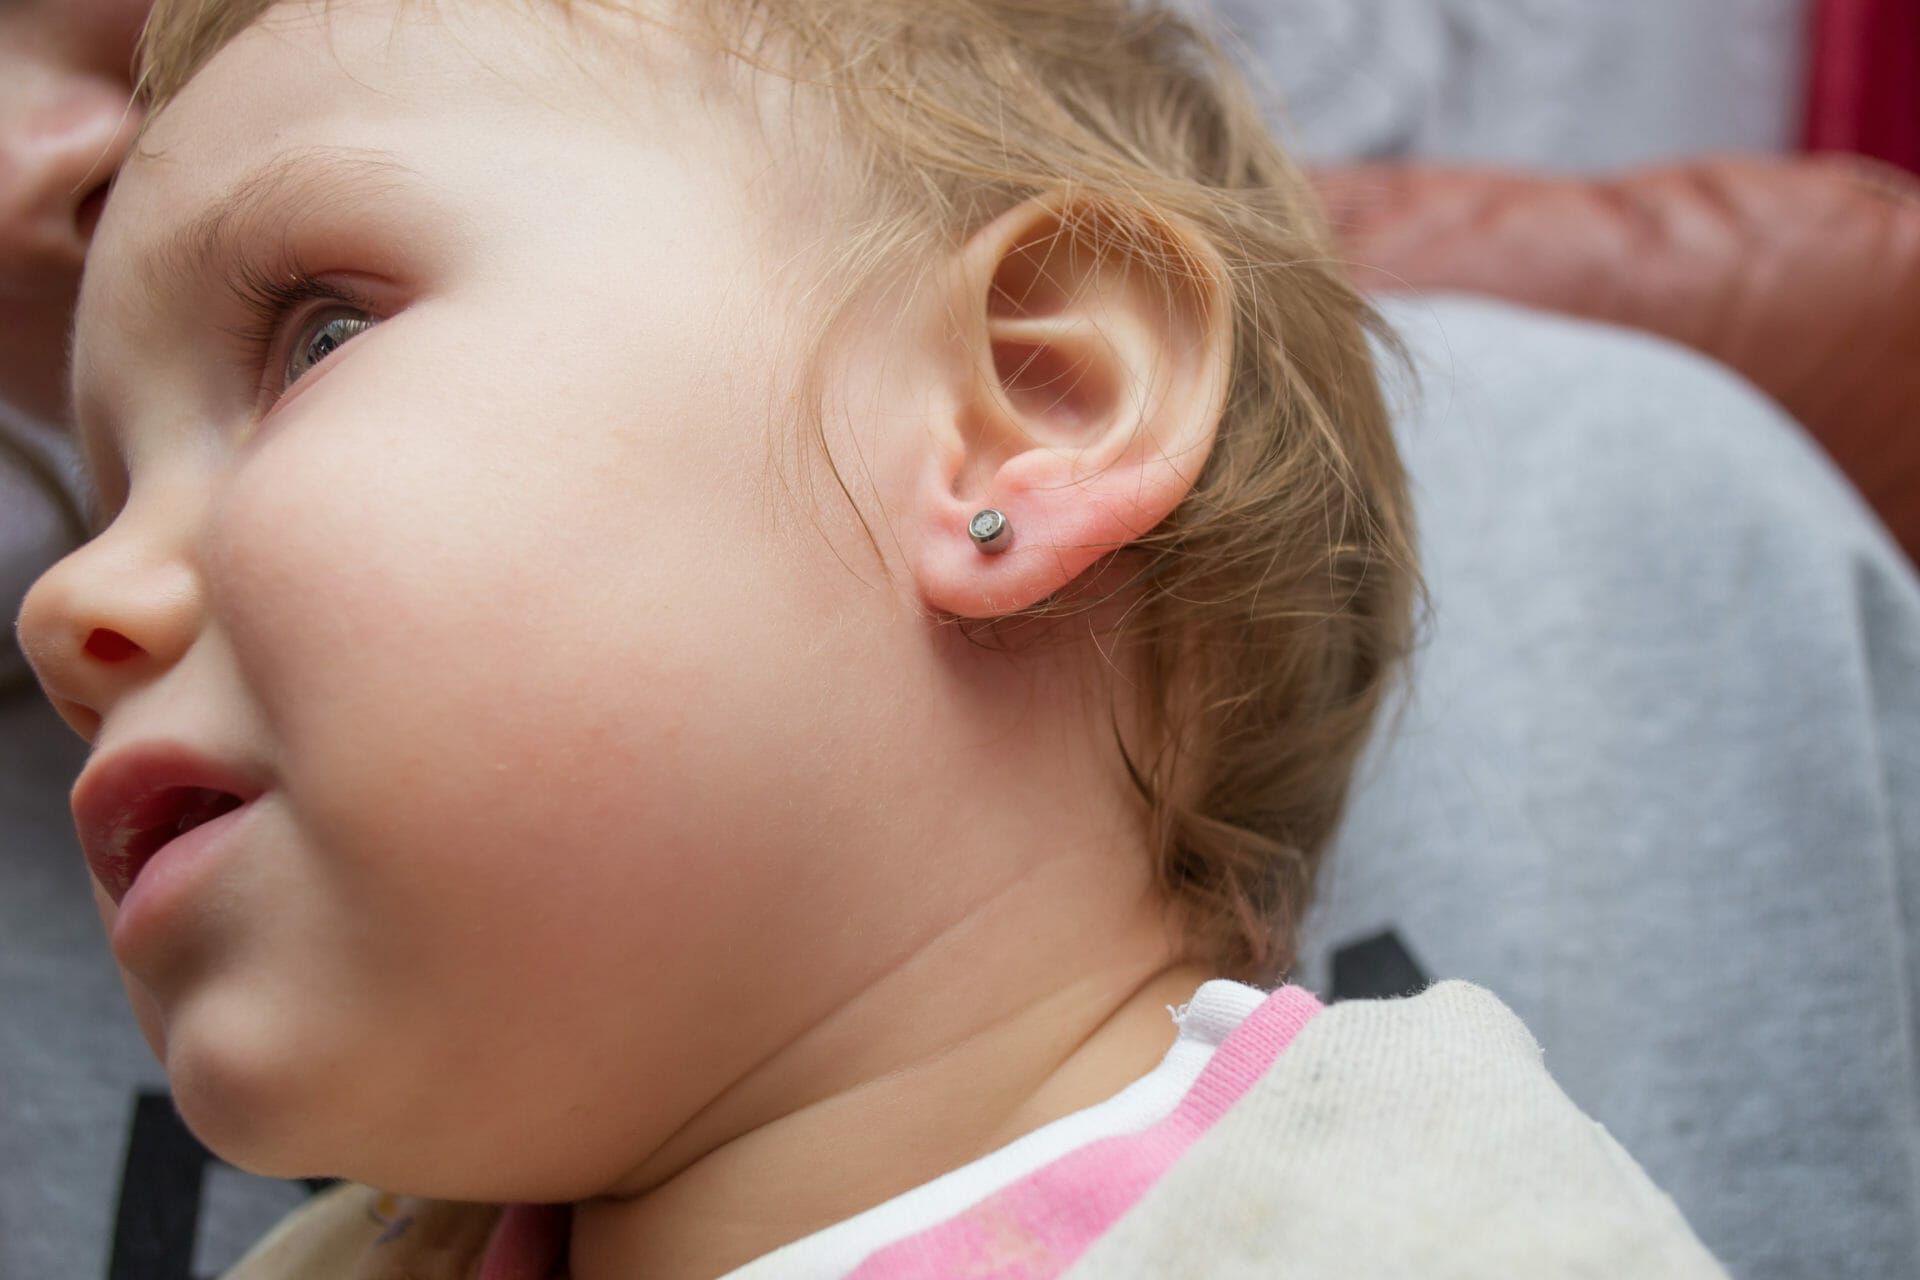 a little girl is treated with a wound on the earlobe after earring piercing